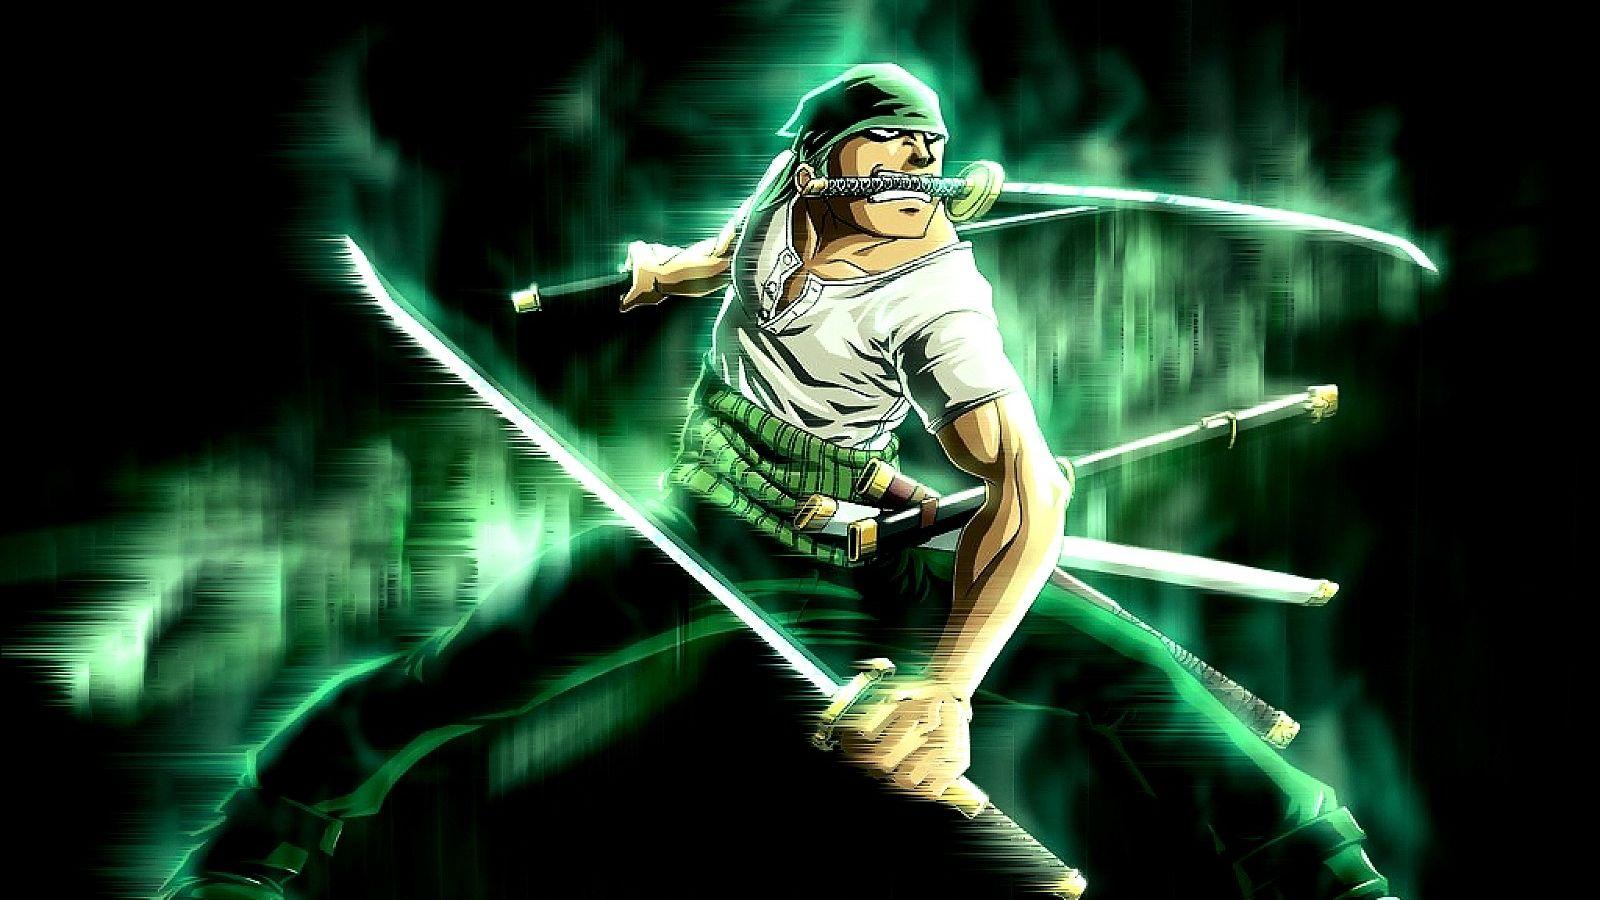 Zoro King of Hell Wallpapers - Top Free Zoro King of Hell Backgrounds ...